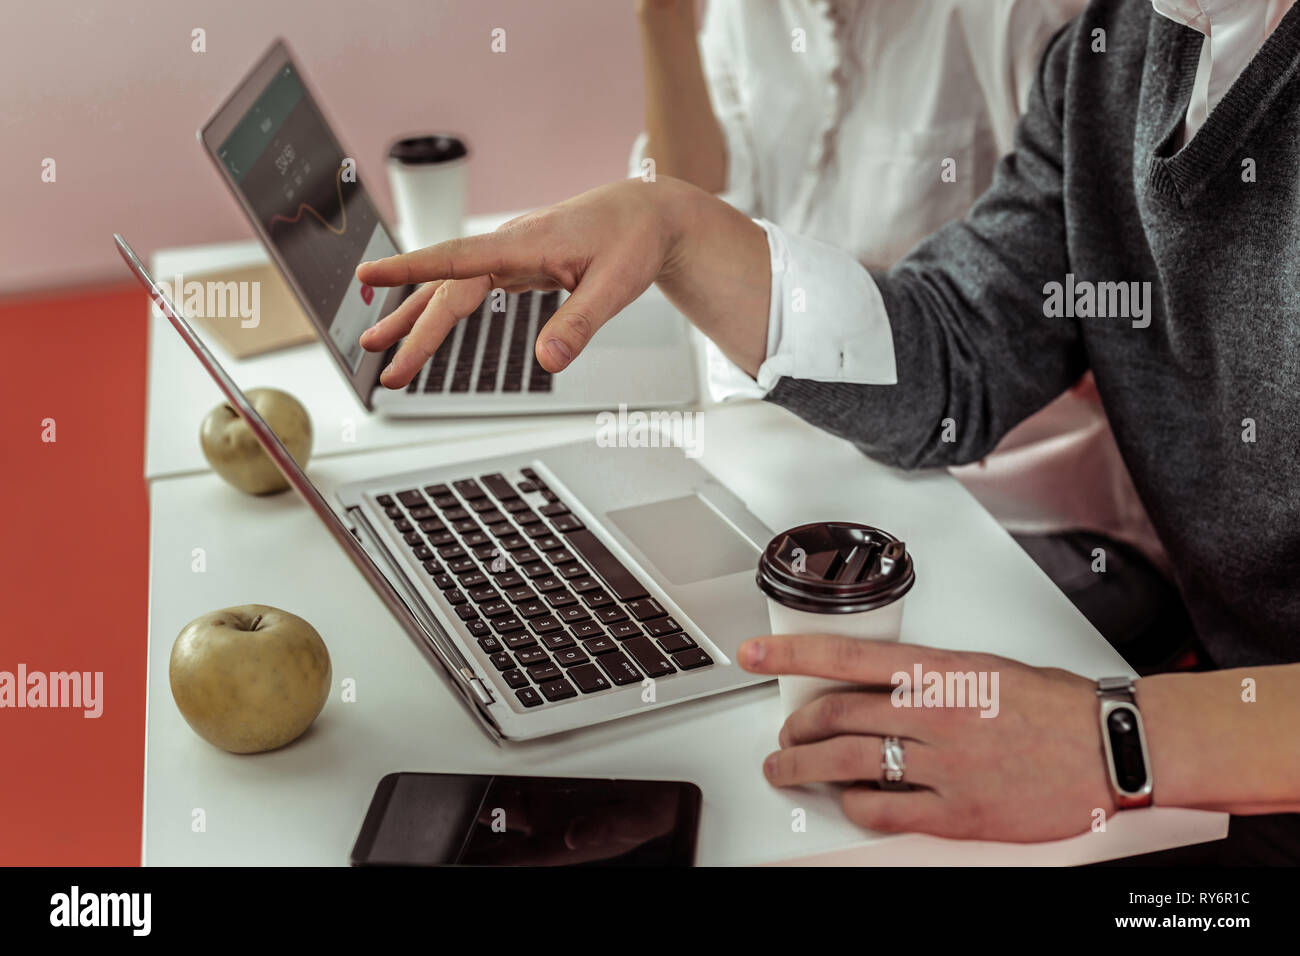 Resolute guy paying attention on information on laptop screen Stock Photo